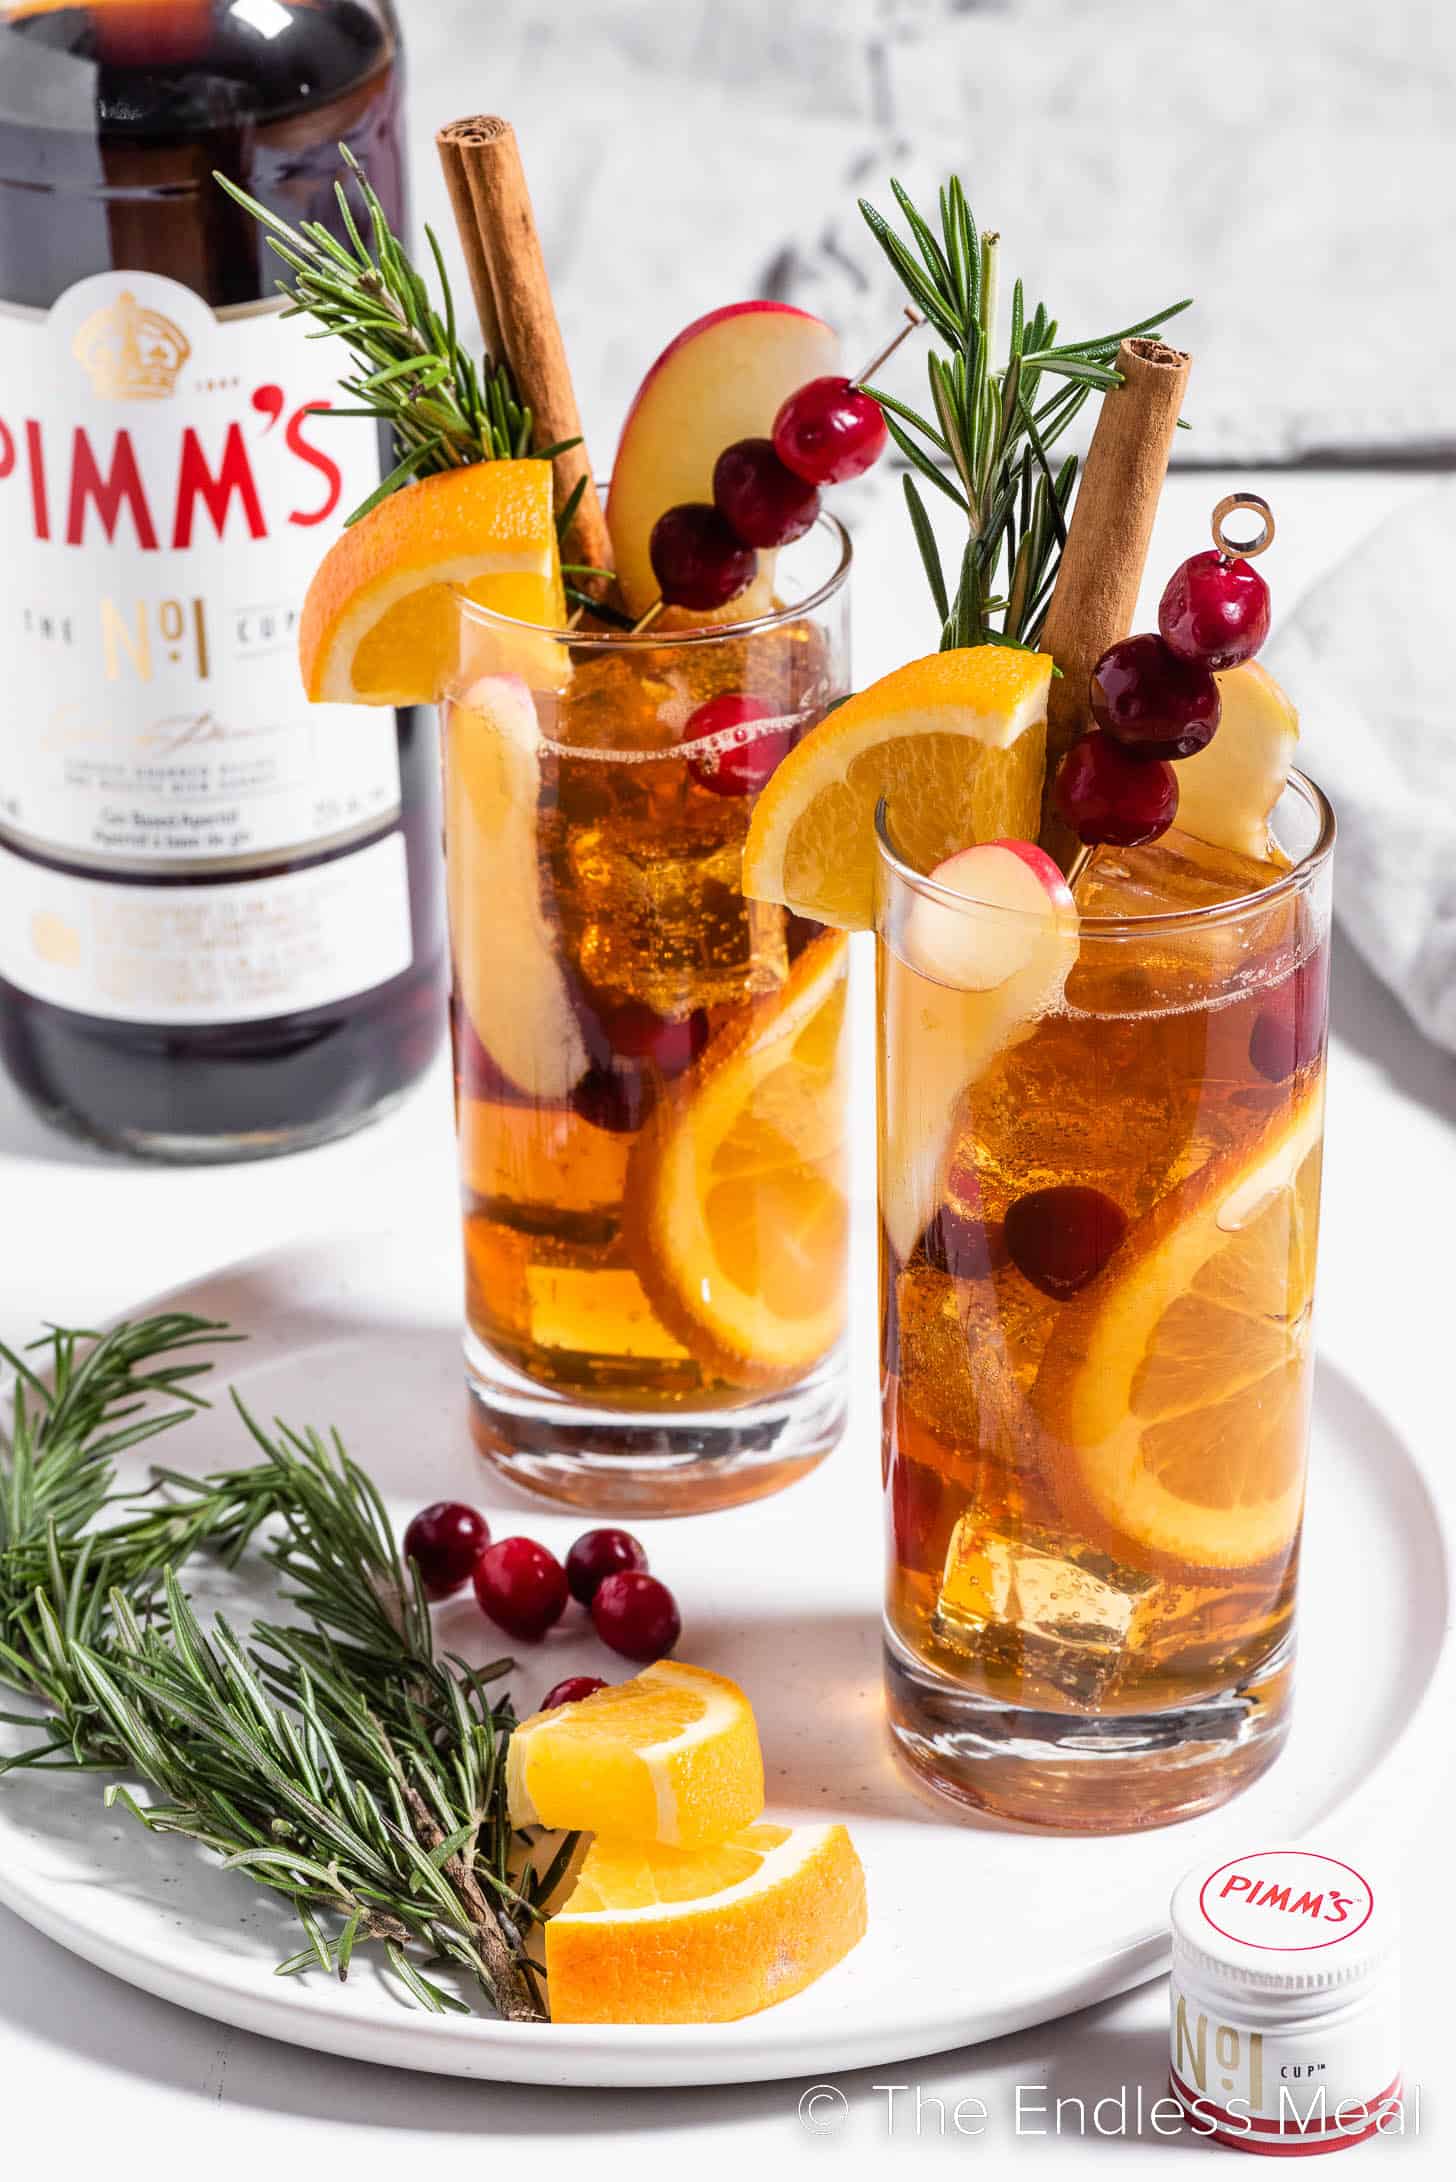 Winter Pimm's in glasses with lots of garnishes